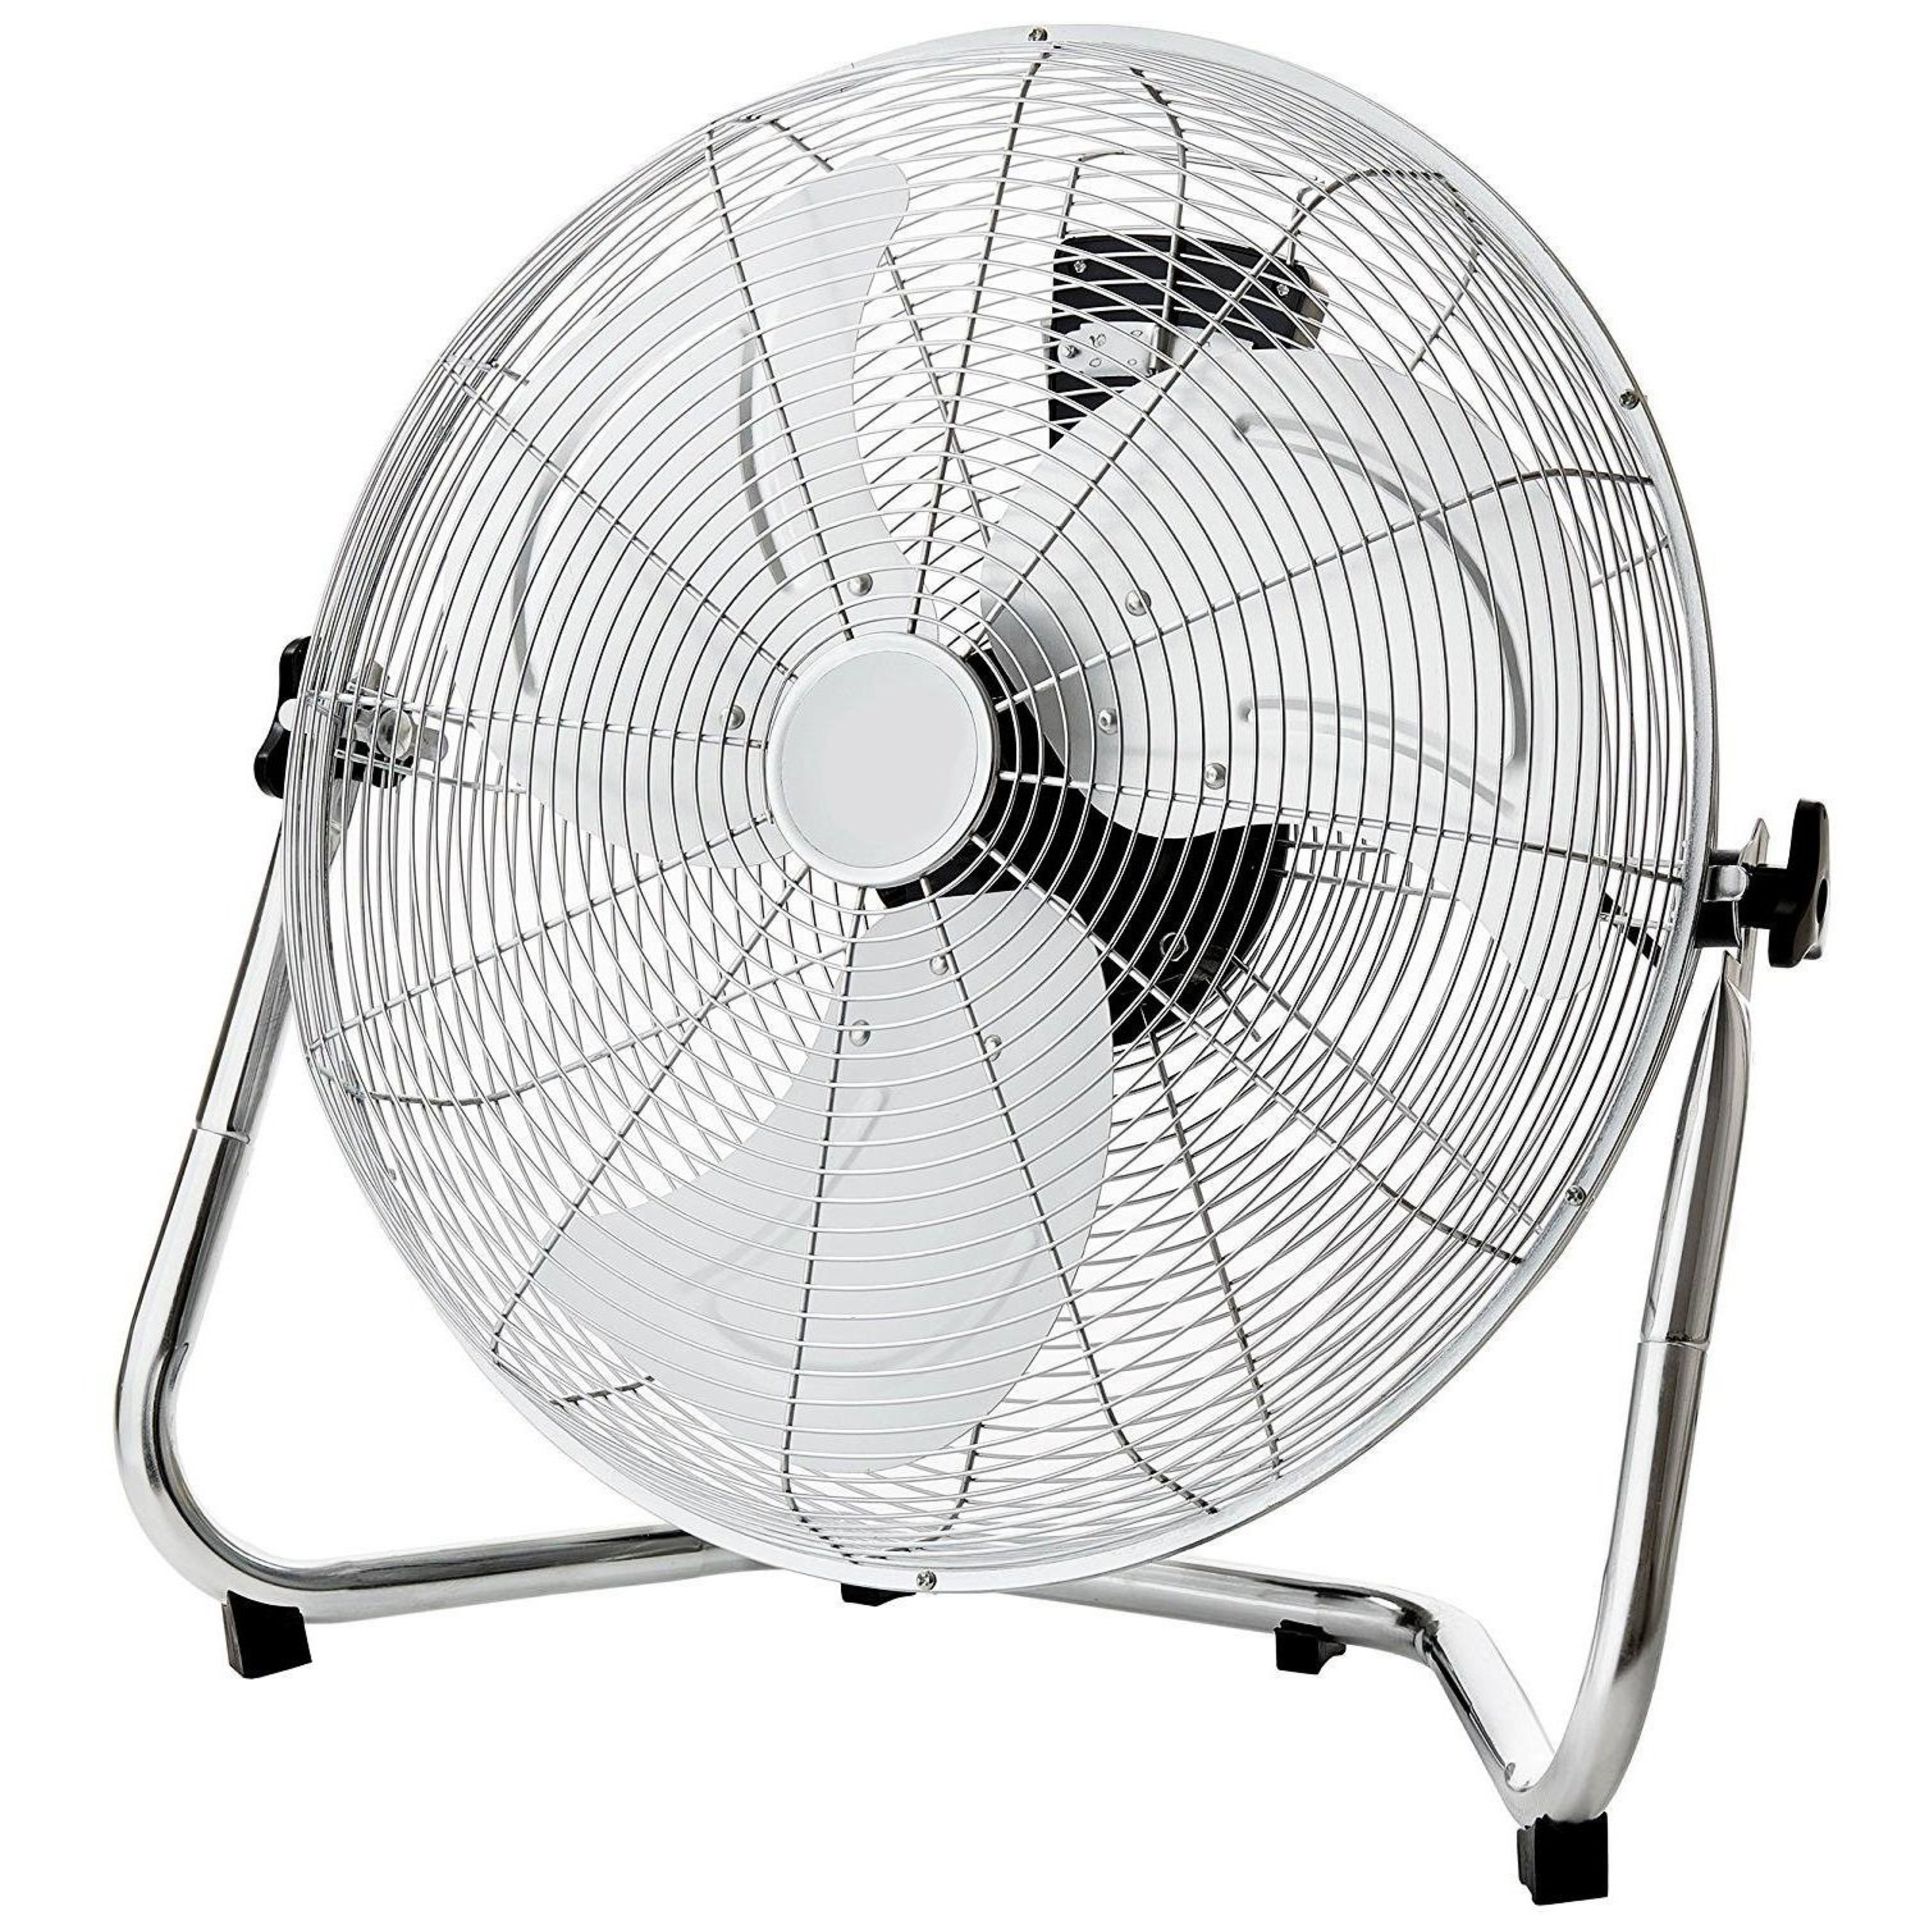 (LF131) 18" Chrome 3 Speed Free Standing Gym Fan 3 Speed Push Button Speed Control Fixed Posi... - Image 2 of 2